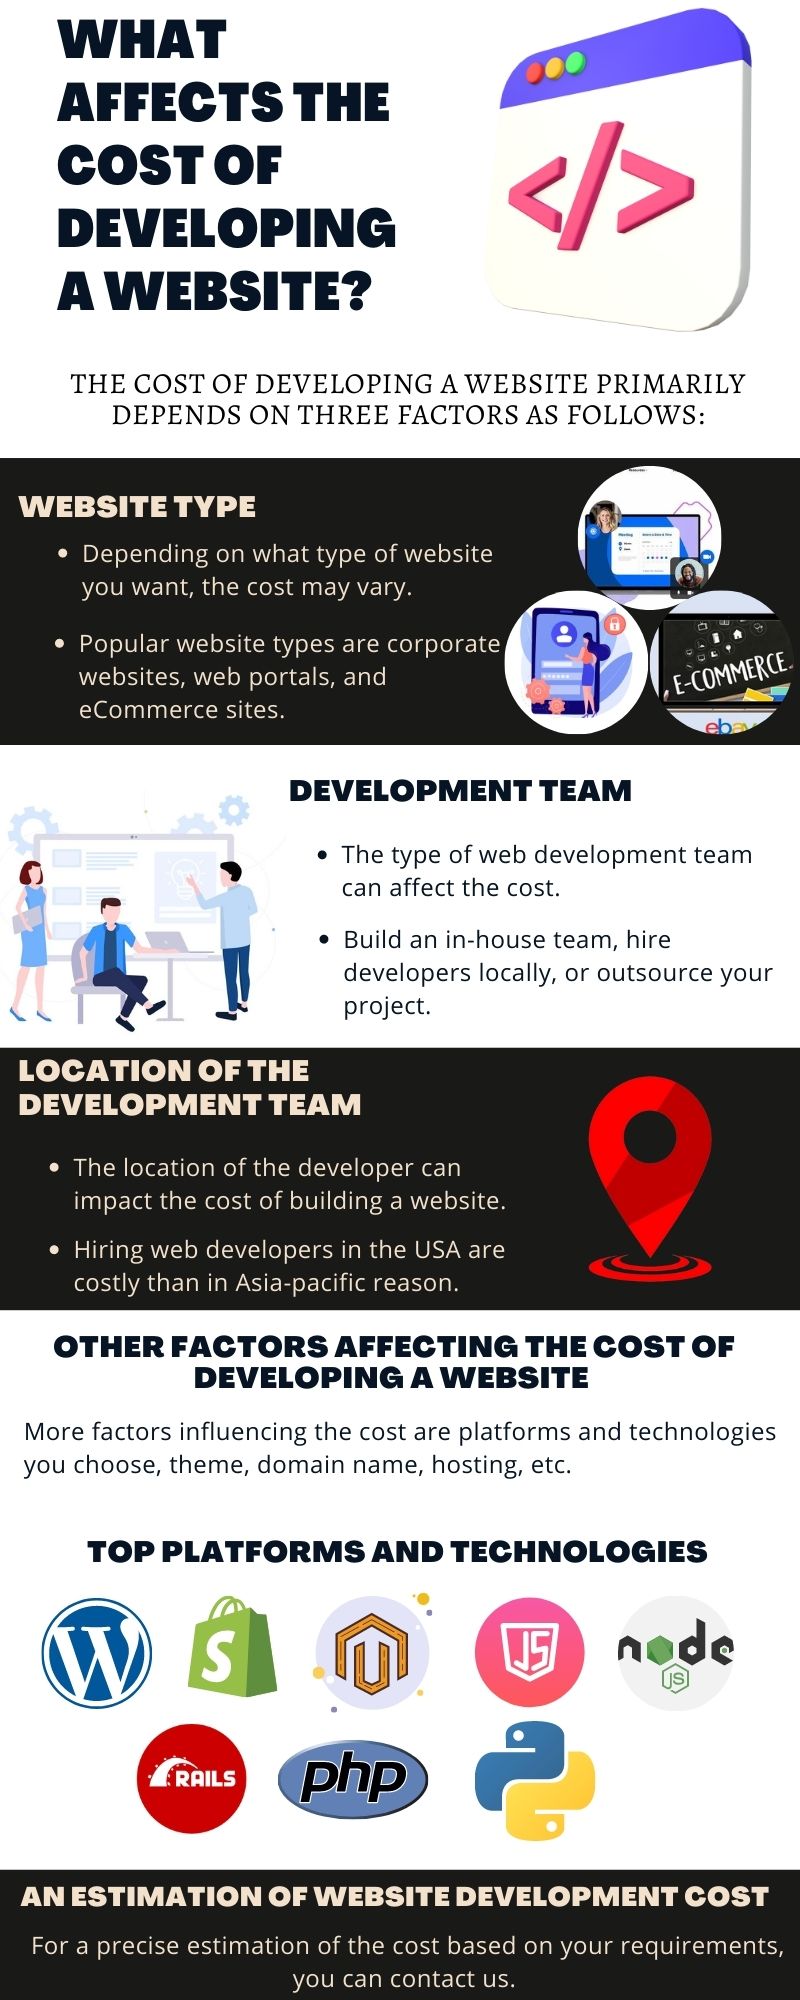 What Affects the Cost of Developing a Website